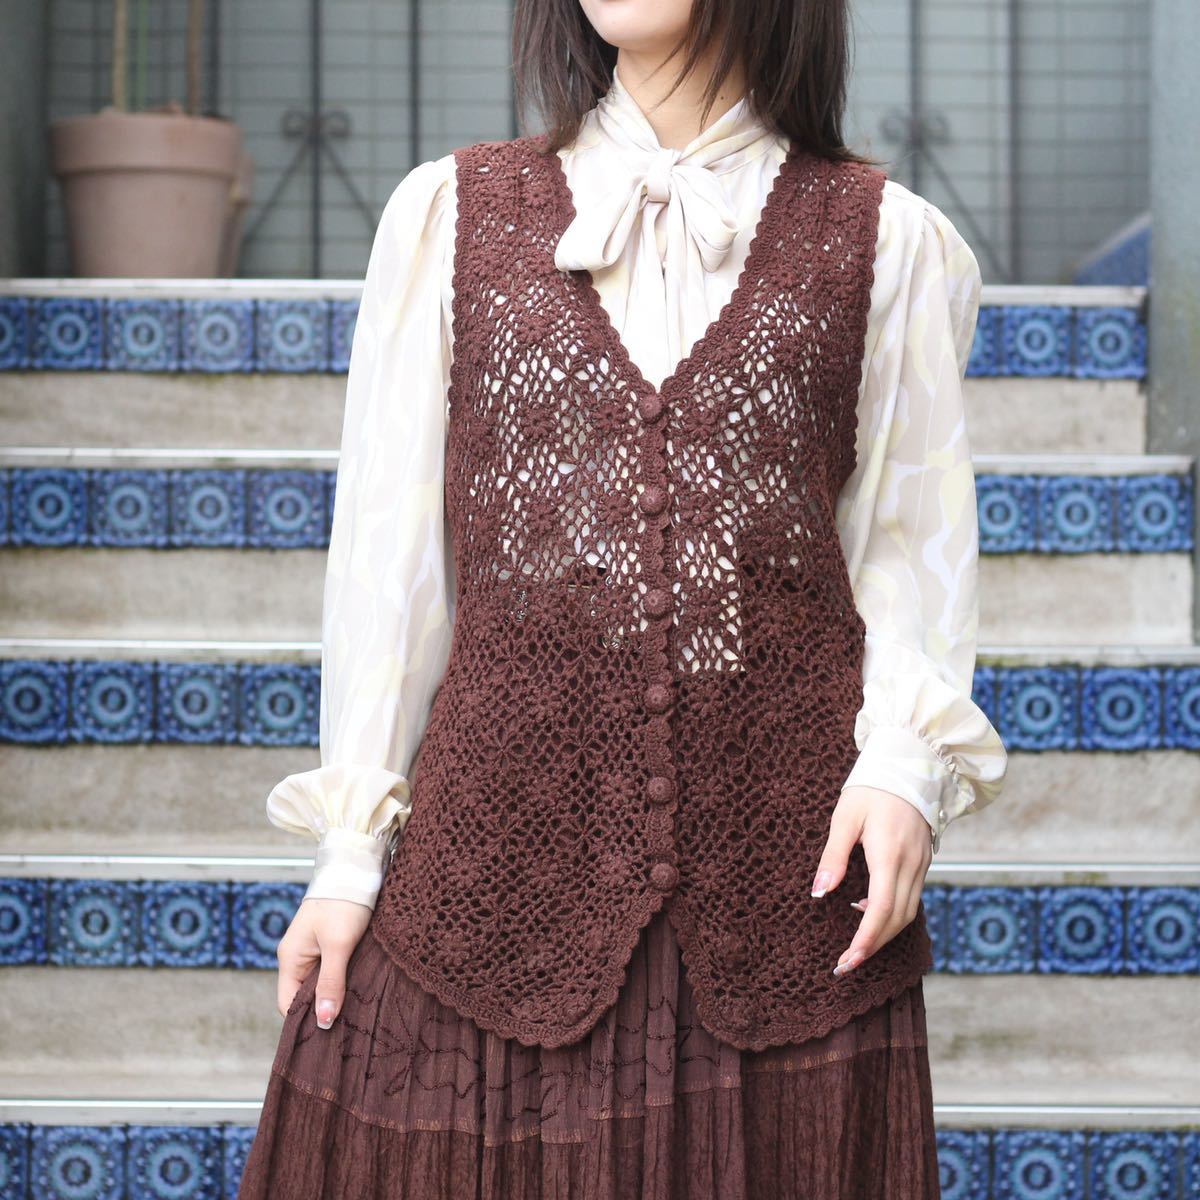 USA VINTAGE FLOWER PATTERNED EMBROIDERY KNIT VEST/アメリカ古着お花刺繍ニットベスト_画像1